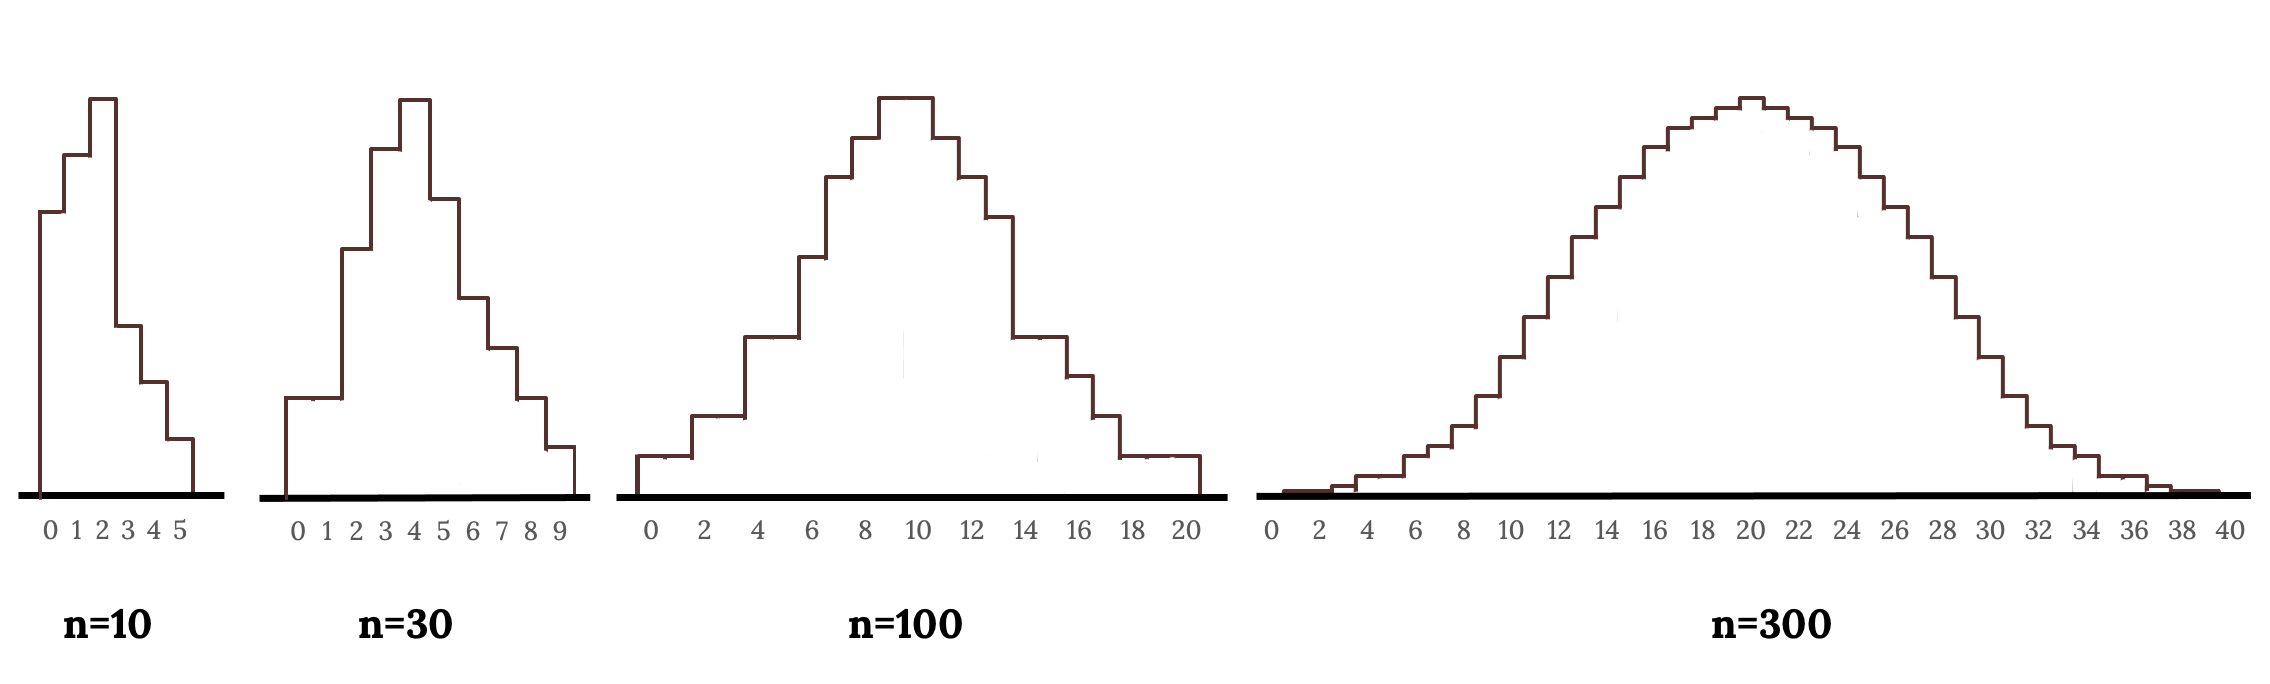 Four hollow histograms side by side. First: represents n=10 and has higher values towards 0-2 and lower ones to the right. Second: represents n=30 and has higher values around 4 with lower ones to the left and right of 4. Third: represetns n=100 and has x values ranging from 0-20. Follows a bell shape. Fourth: represetns n=300 and has x values ranging from 10-50. Follows a bell shape.